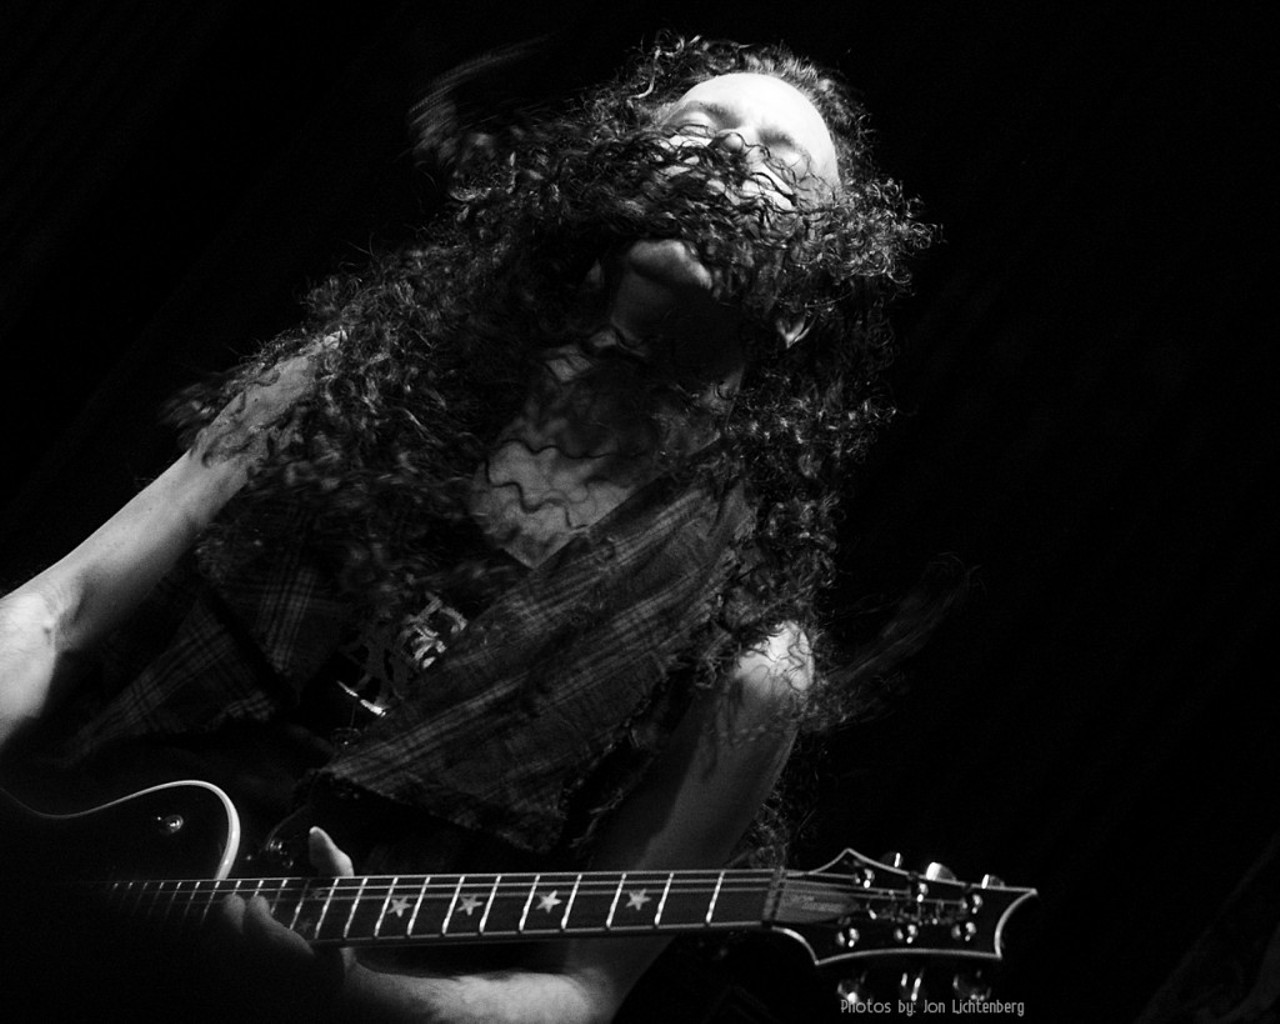 Marty Friedman Performing at the Beachland Ballroom